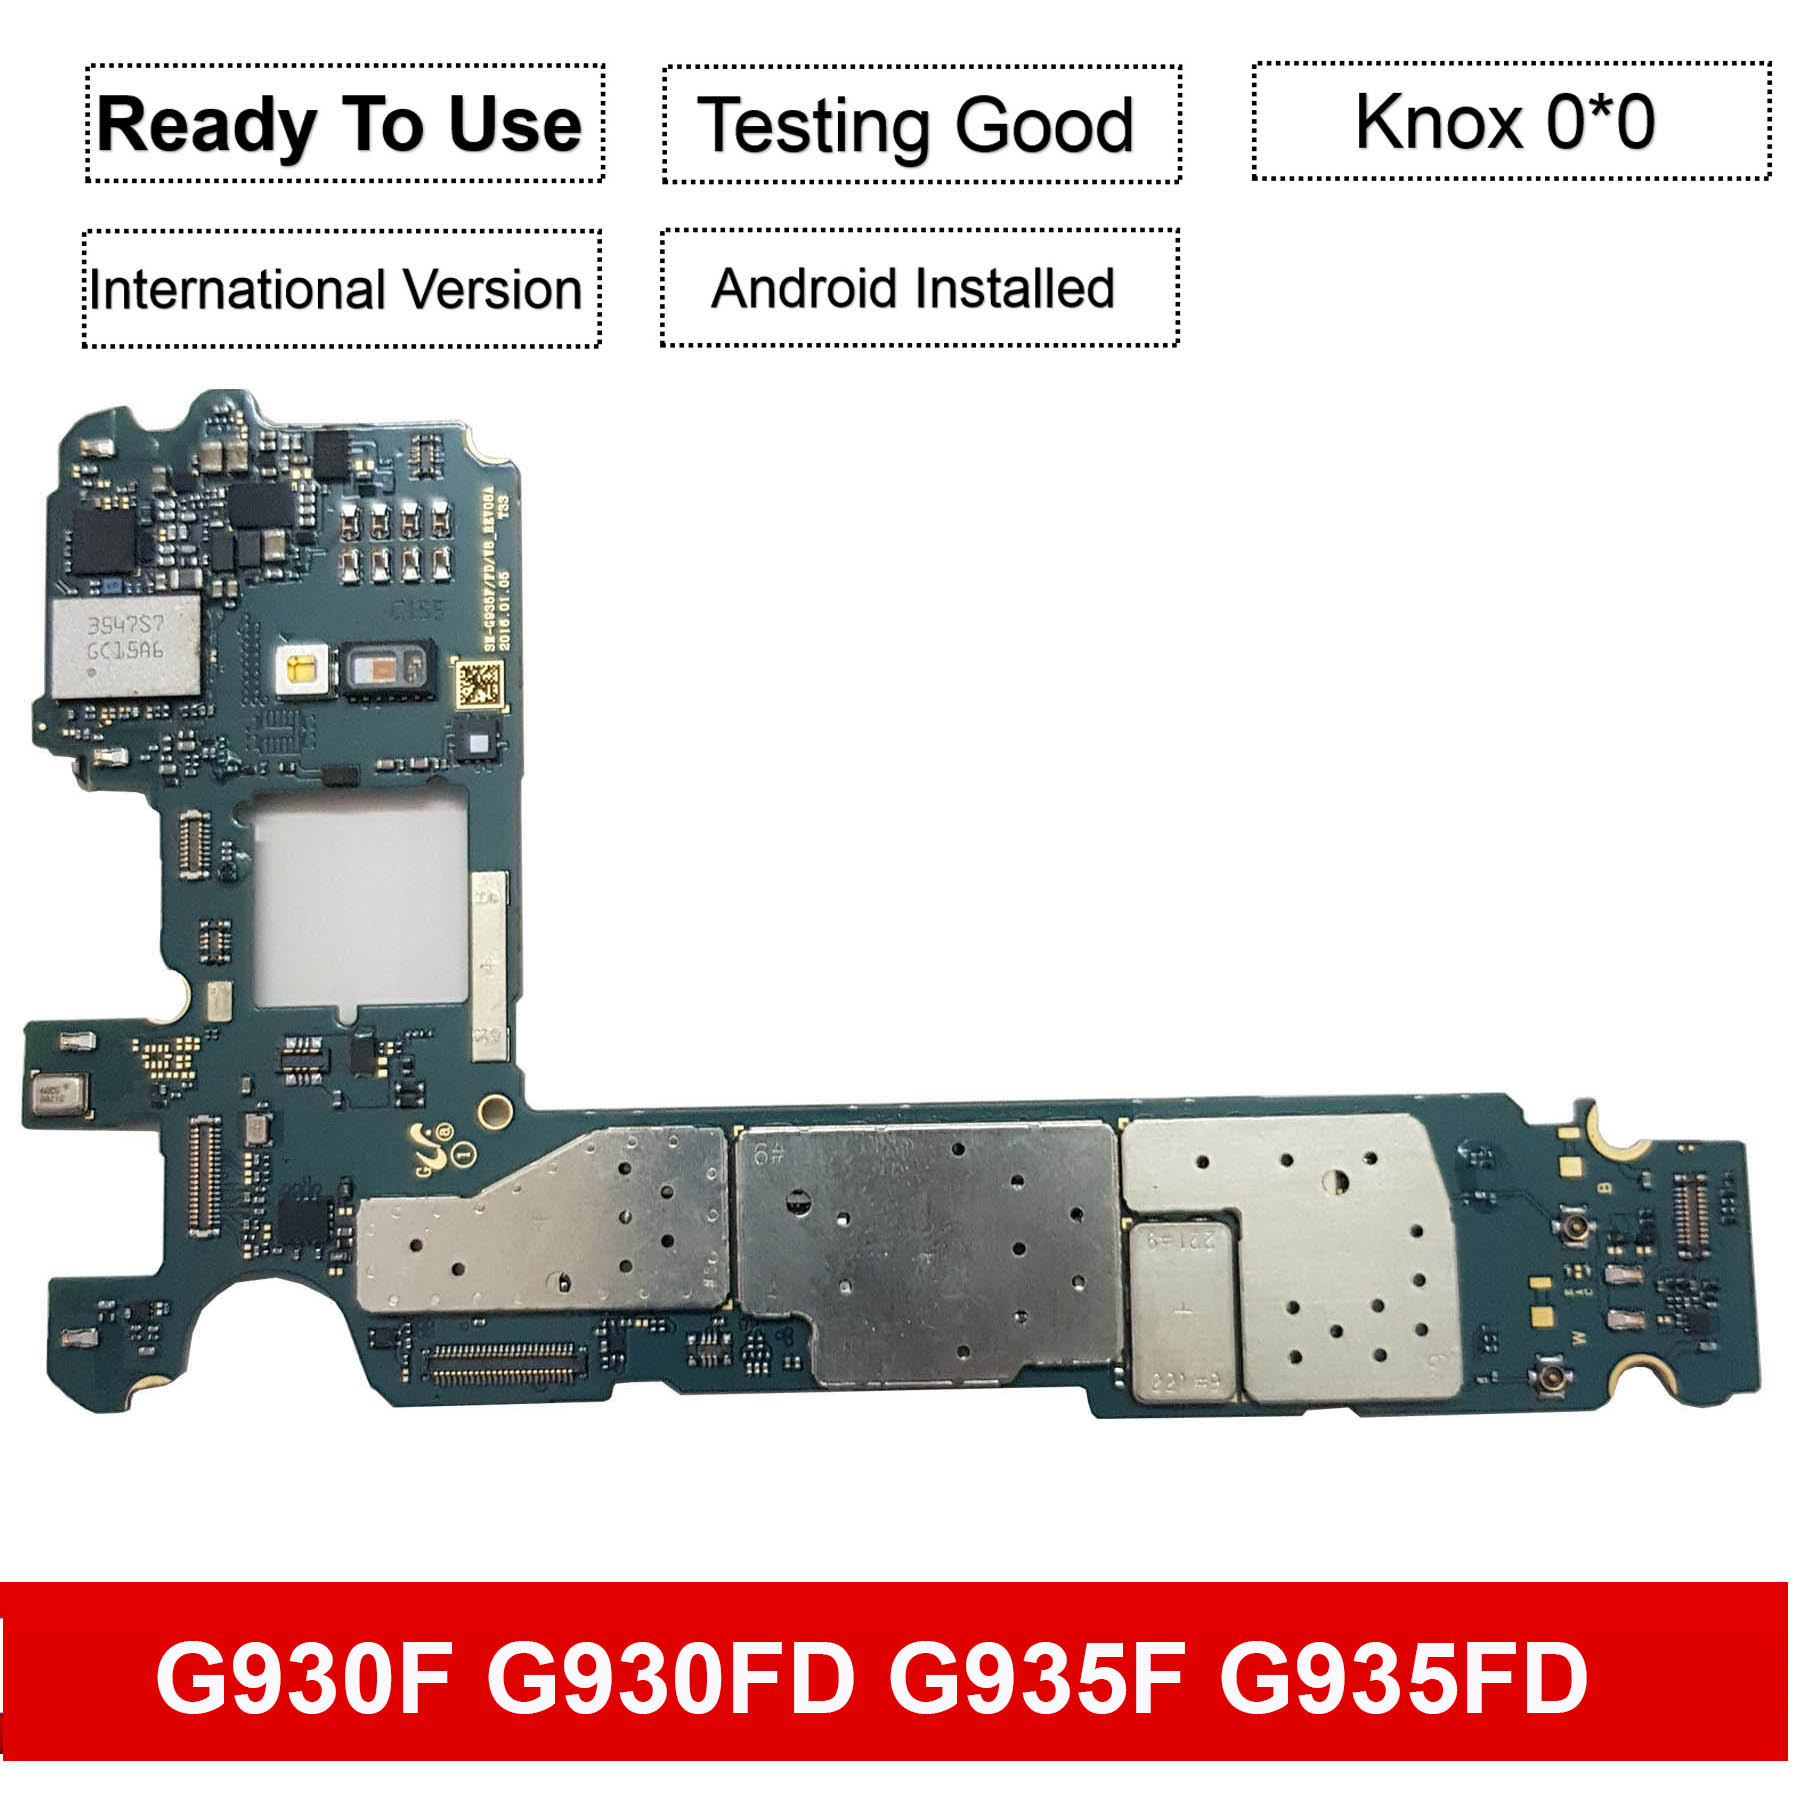 Verplicht stropdas je bent Price history & Review on 32GB Original For Samsung Galaxy S7 edge G935FD  G935F S7 G930F Motherboard With Chips IMEI OS Good Working Logic Board |  AliExpress Seller - myphoneparts Store | Alitools.io